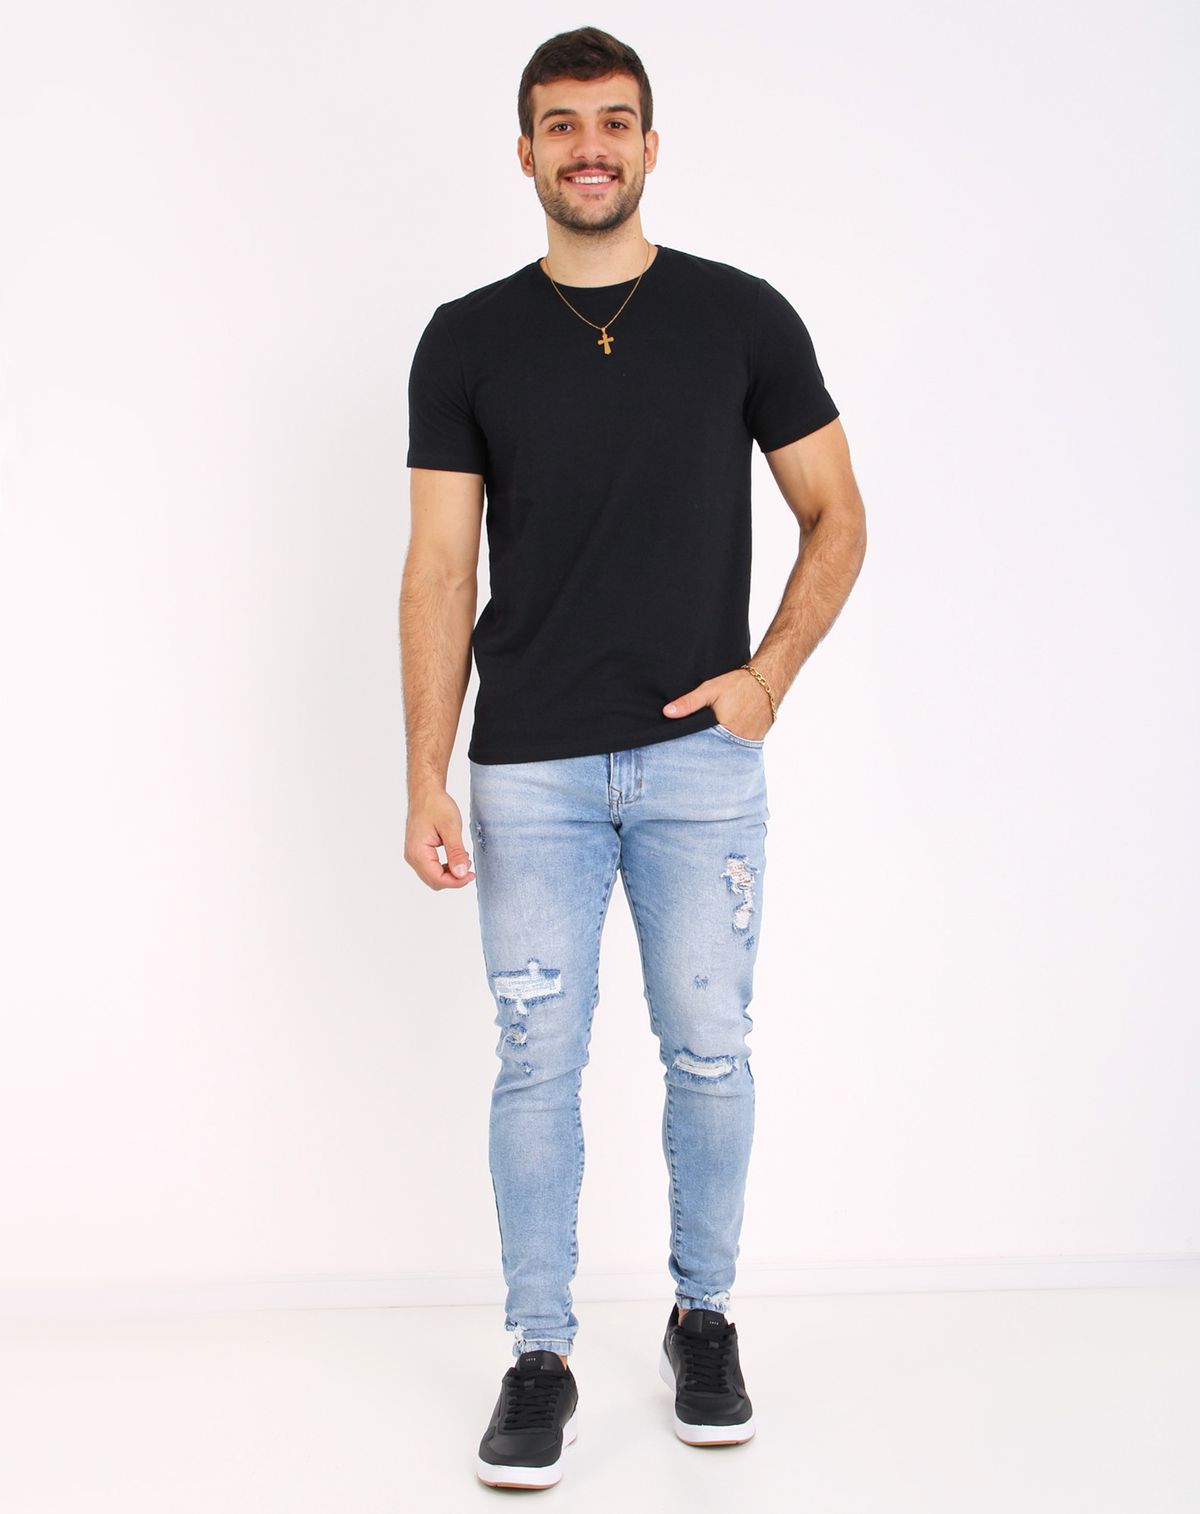 704818002-calca-jeans-skinny-masculina-puidos-jeans-40-400